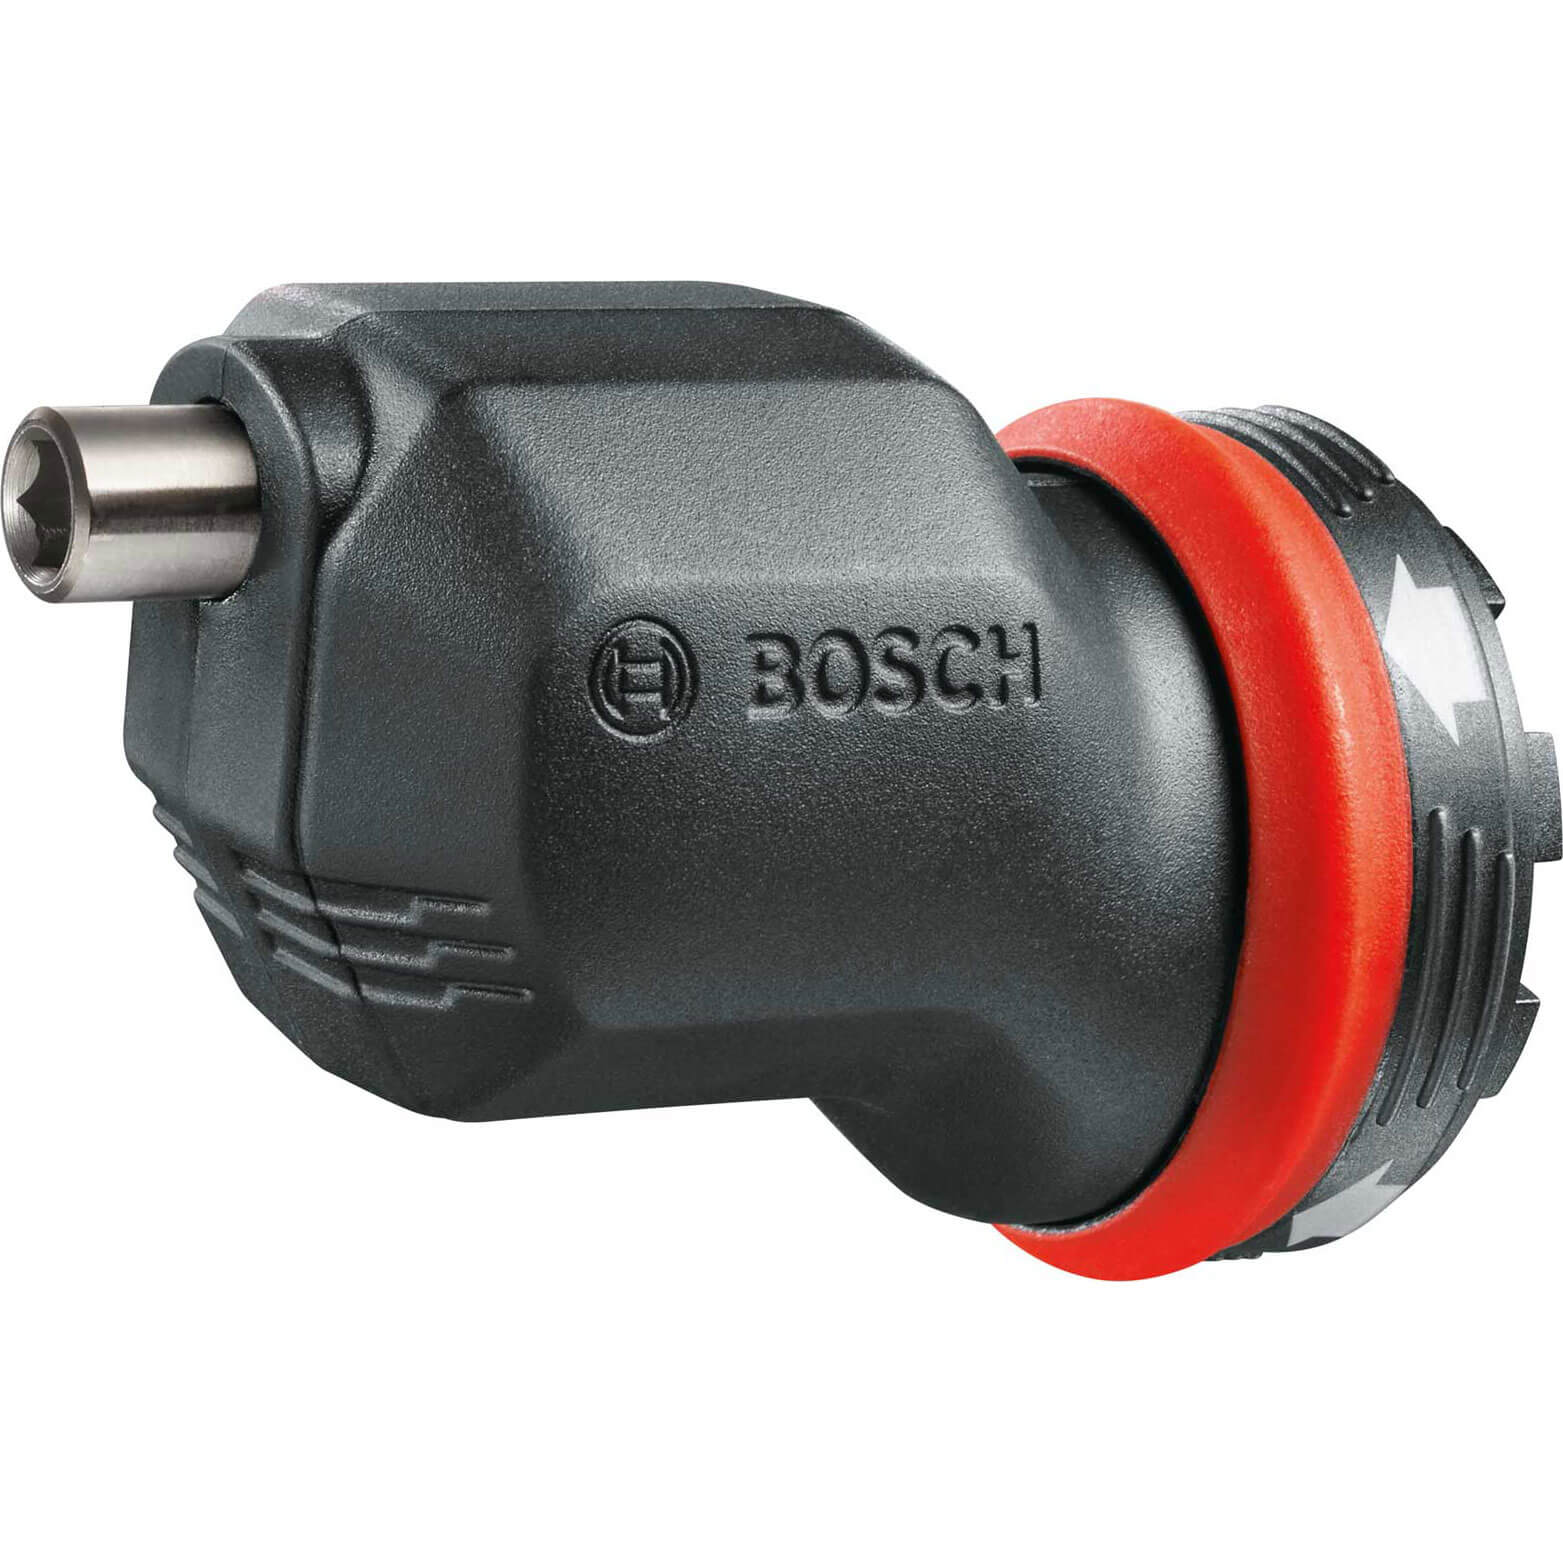 Photo of Bosch Off Set Angled Screwdriver Adapter For Advanceddrill/impact 18